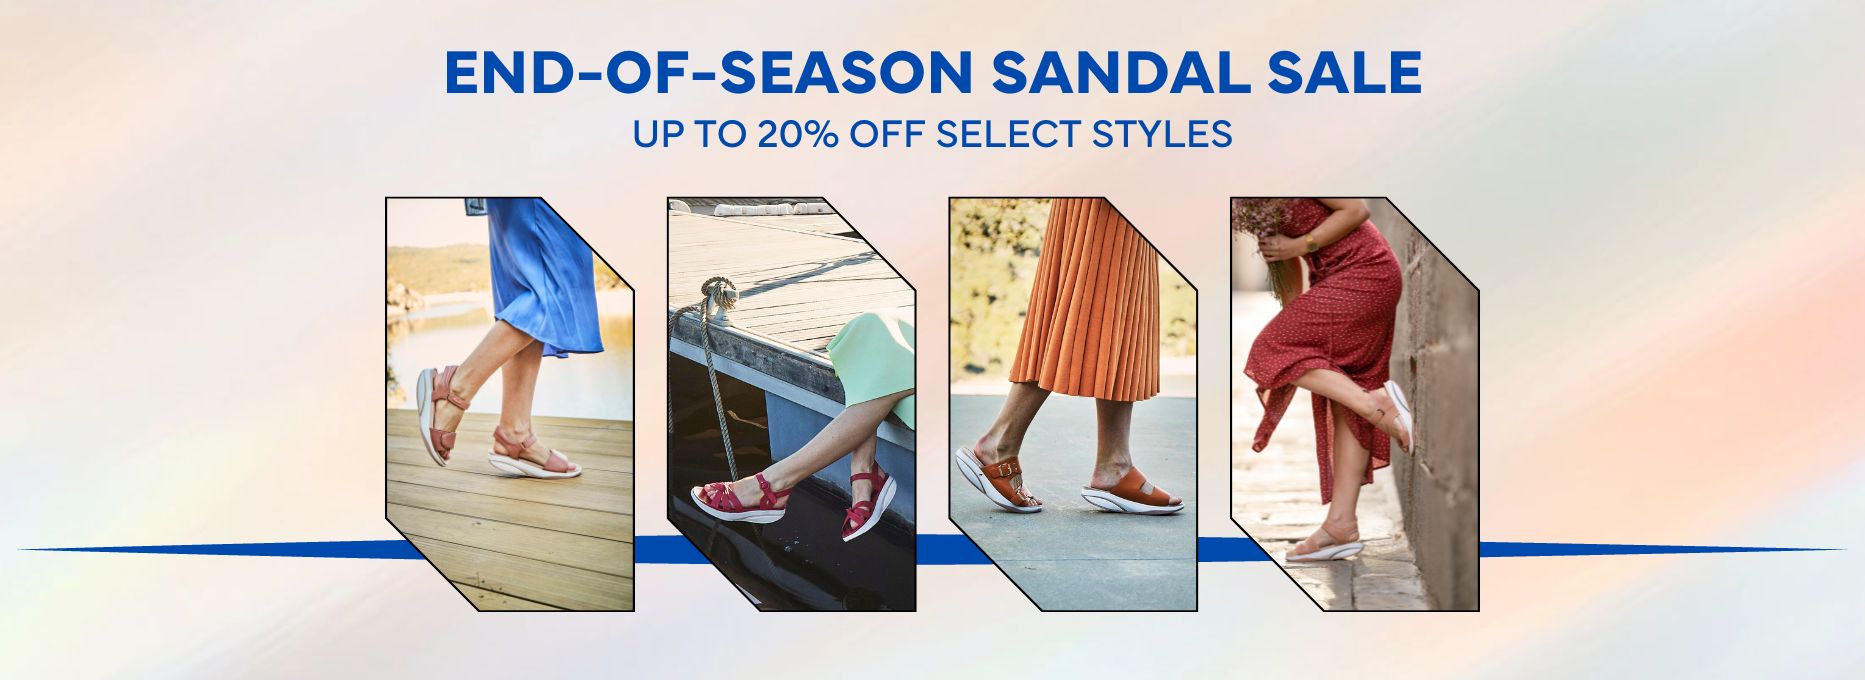 End of the Season Sandal Sale - Up to 20% Off